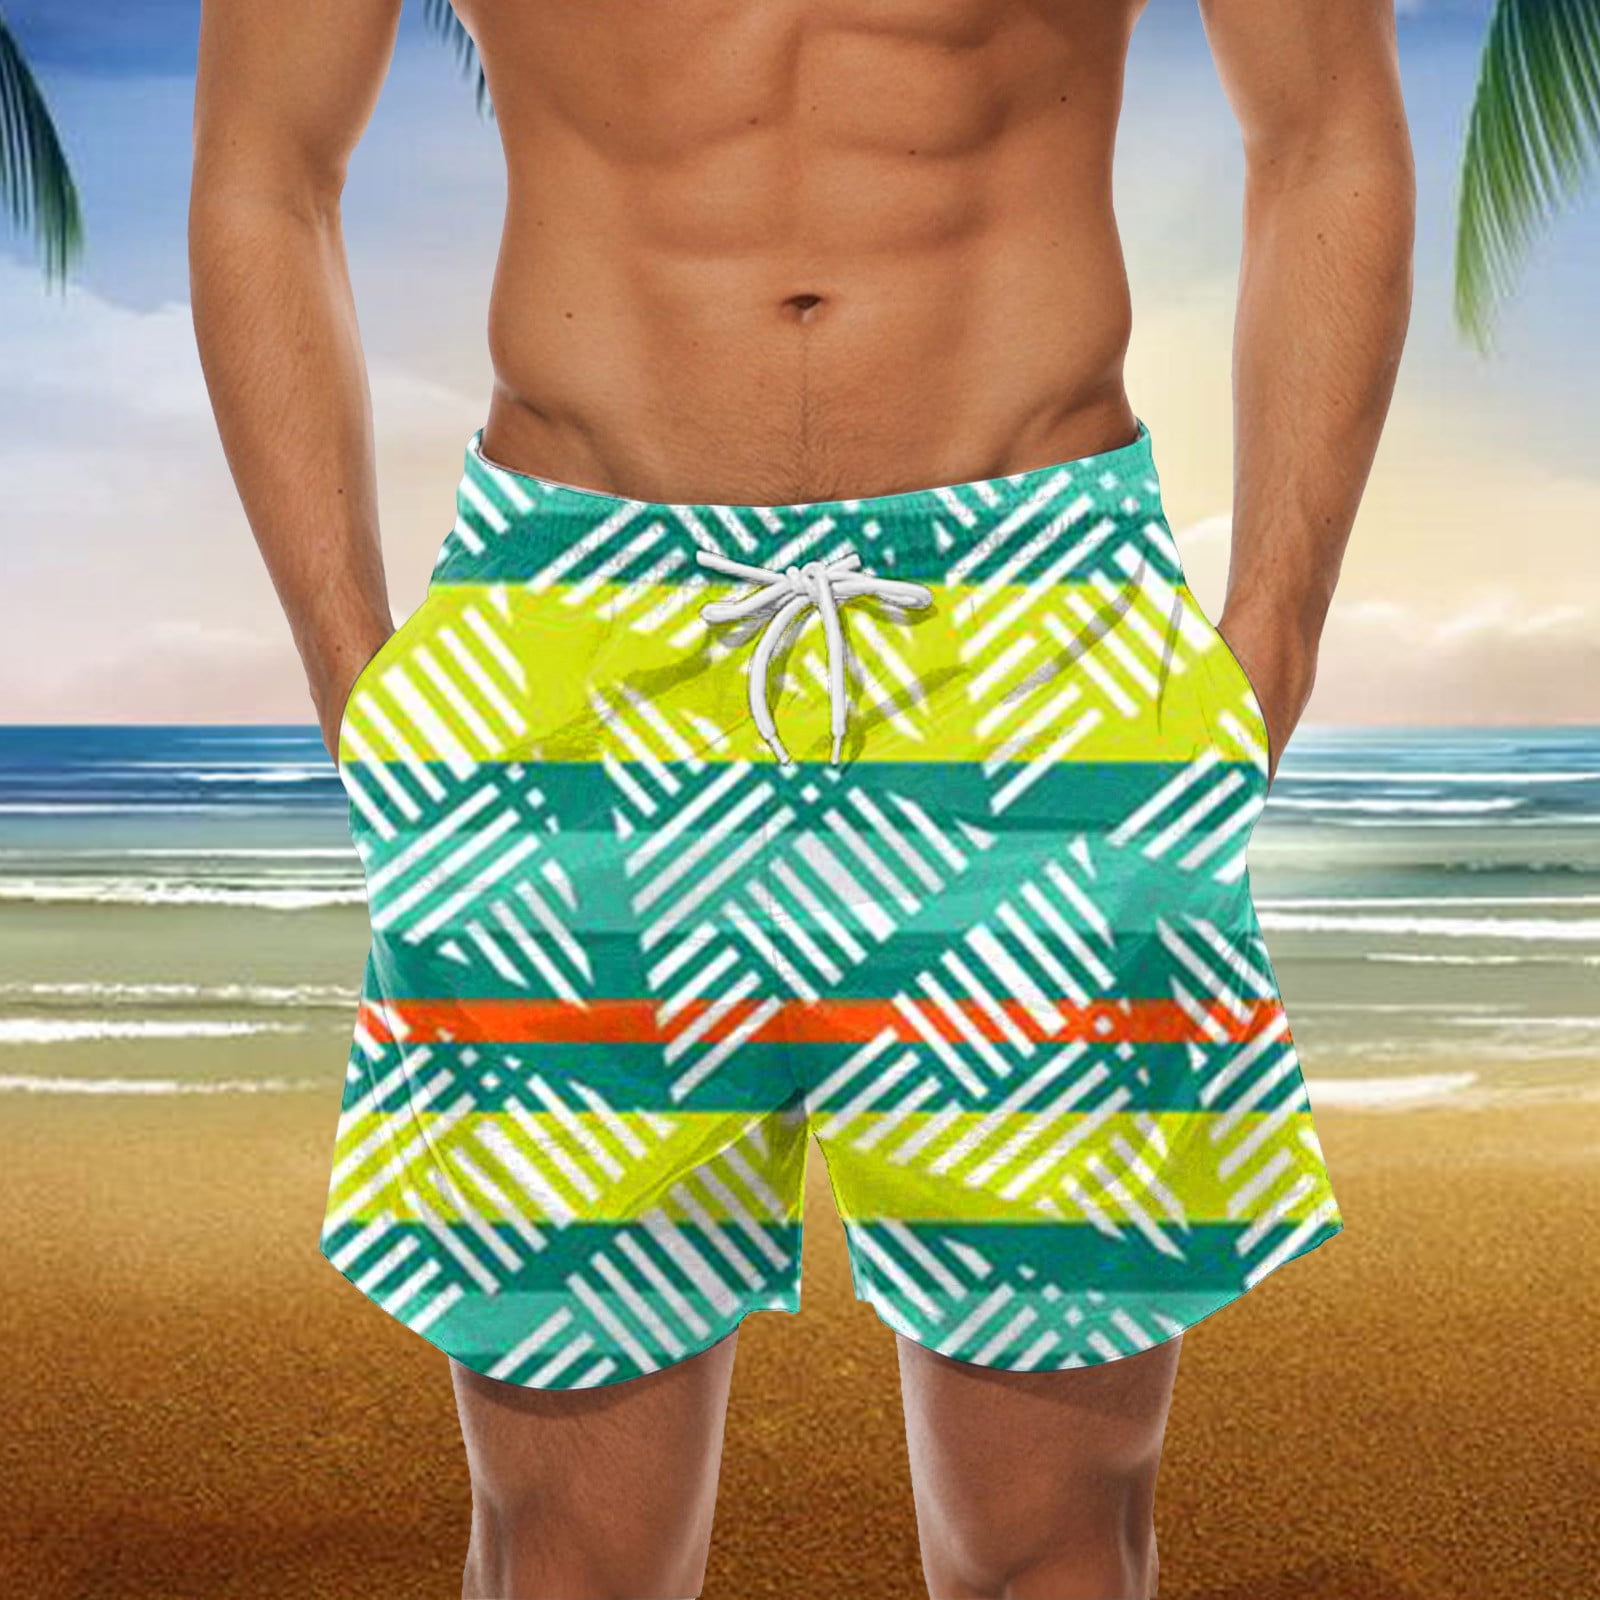 What do you wear under board shorts?